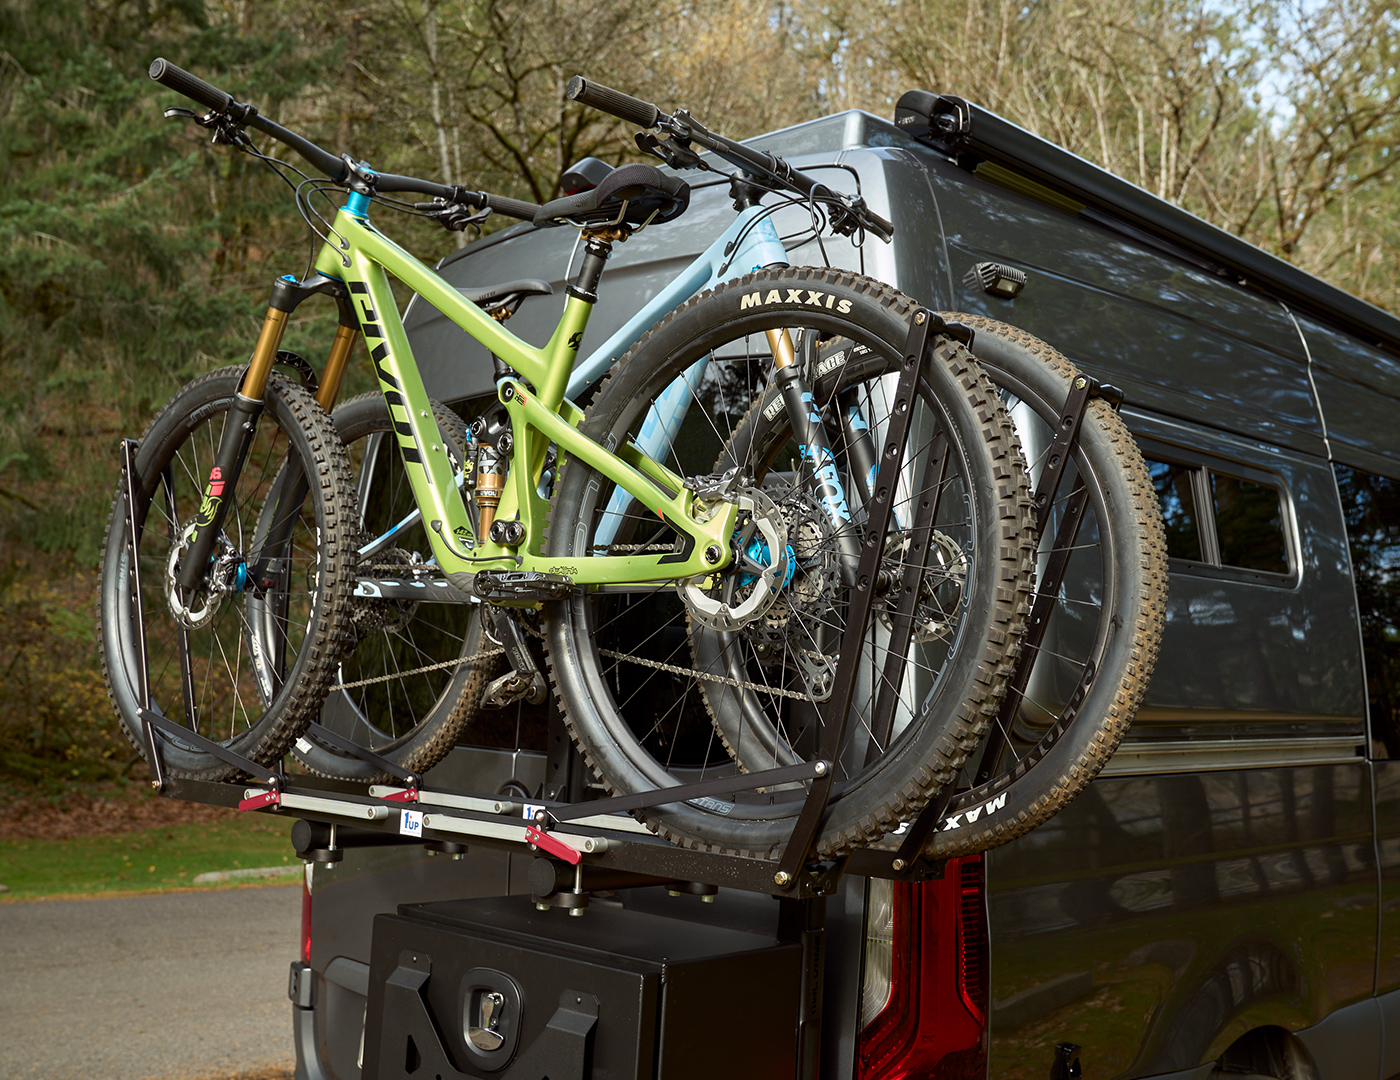 Beta by Outside Van is a custom built Mercedes 144 sprinter with kitchen, enclosed shower, seating for three, and external racks for two mountain bikes